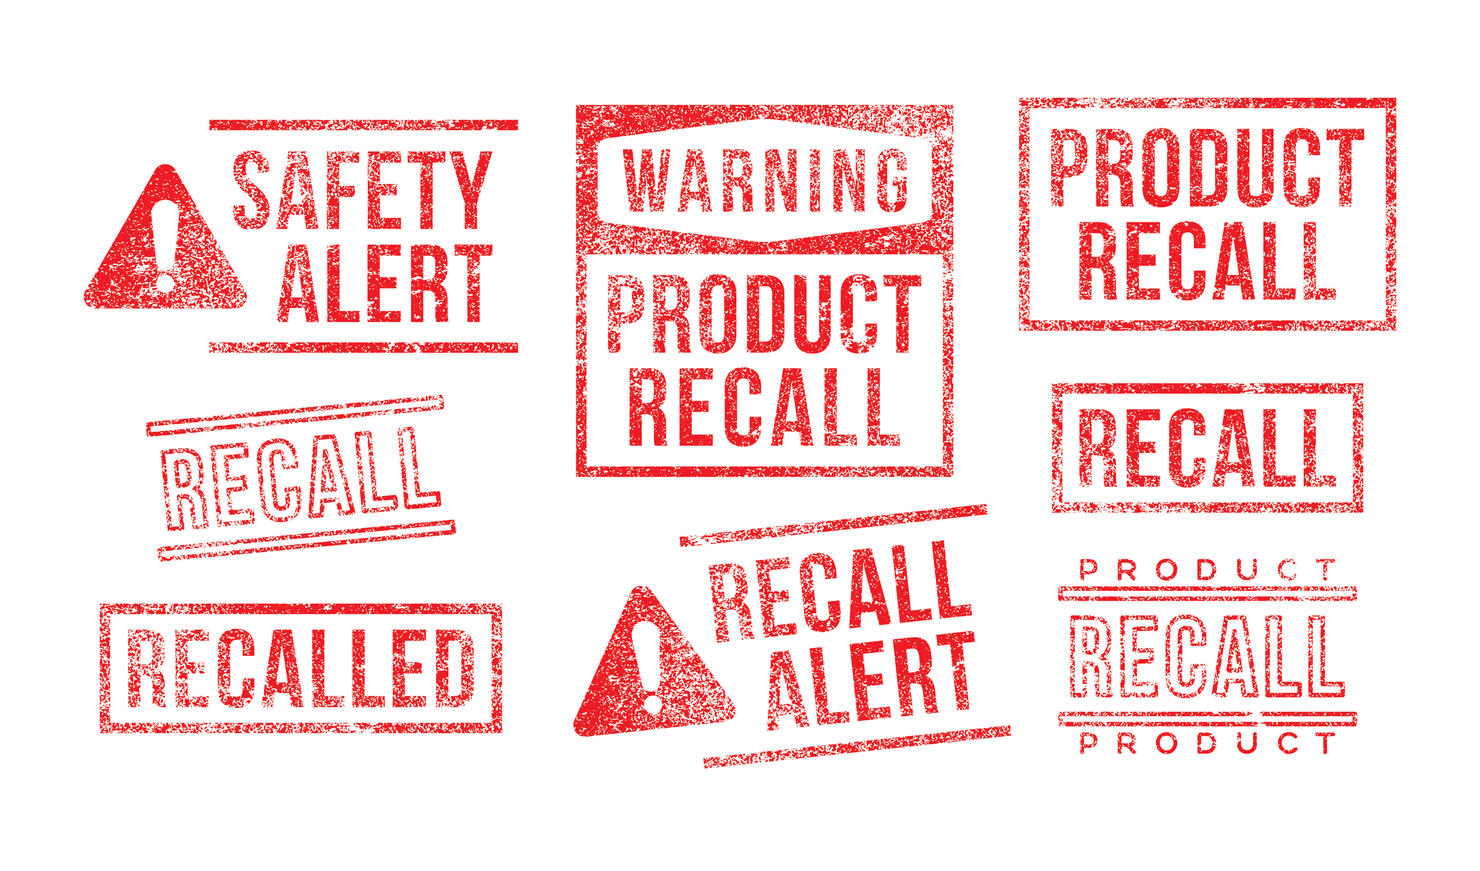 Recall Rubber Stamps Product Safety Alert Warning